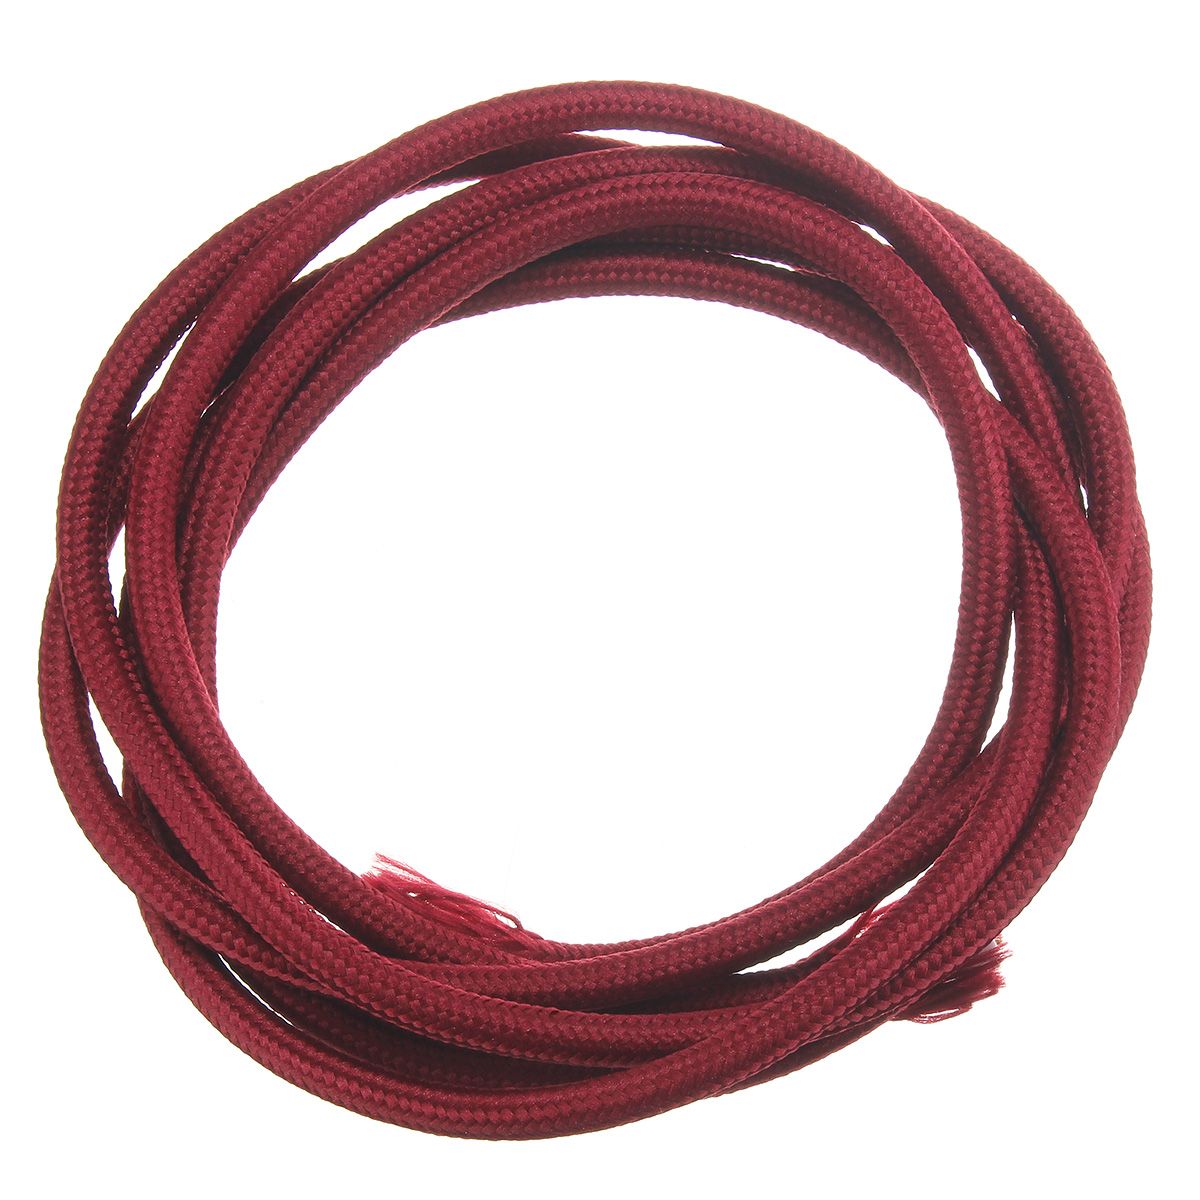 2M-2-Cord-Color-Vintage-Twist-Braided-Fabric-Light-Cable-Electric-Wire-1069144